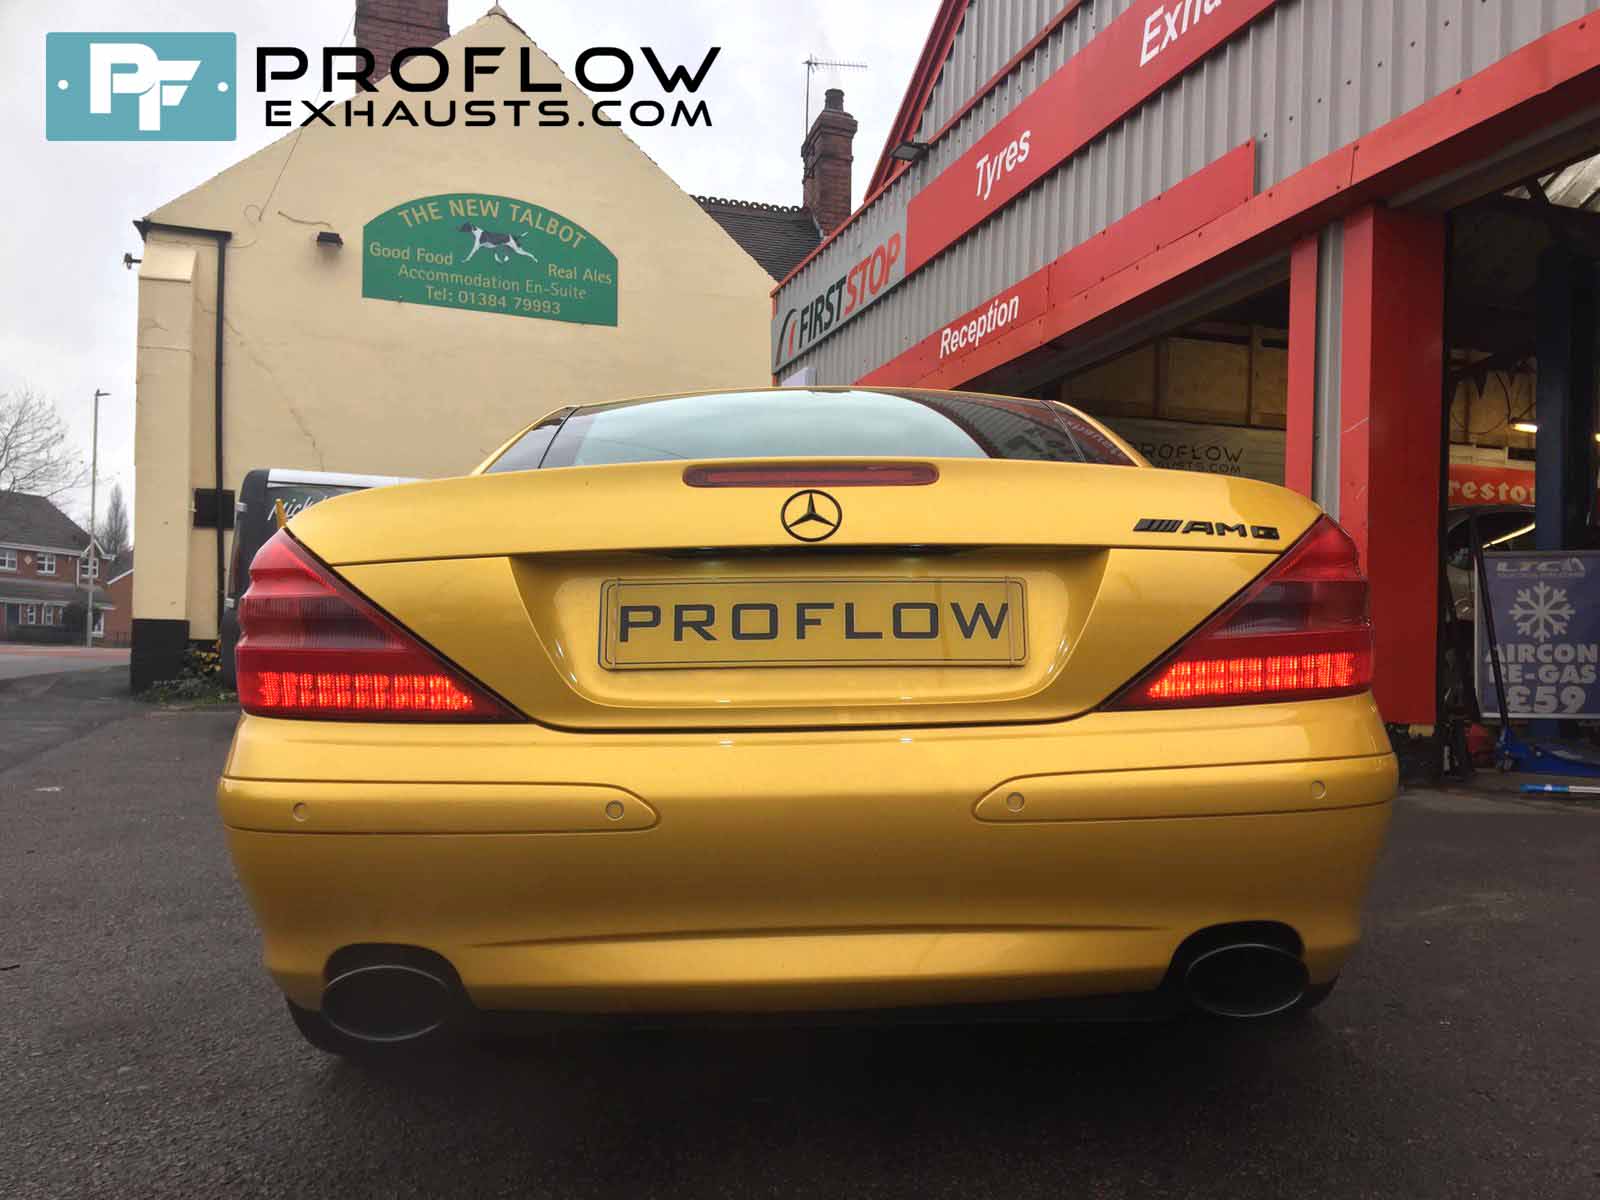 Proflow Exhausts Resonator Delete Dual Tailpipes Mercedes SL500